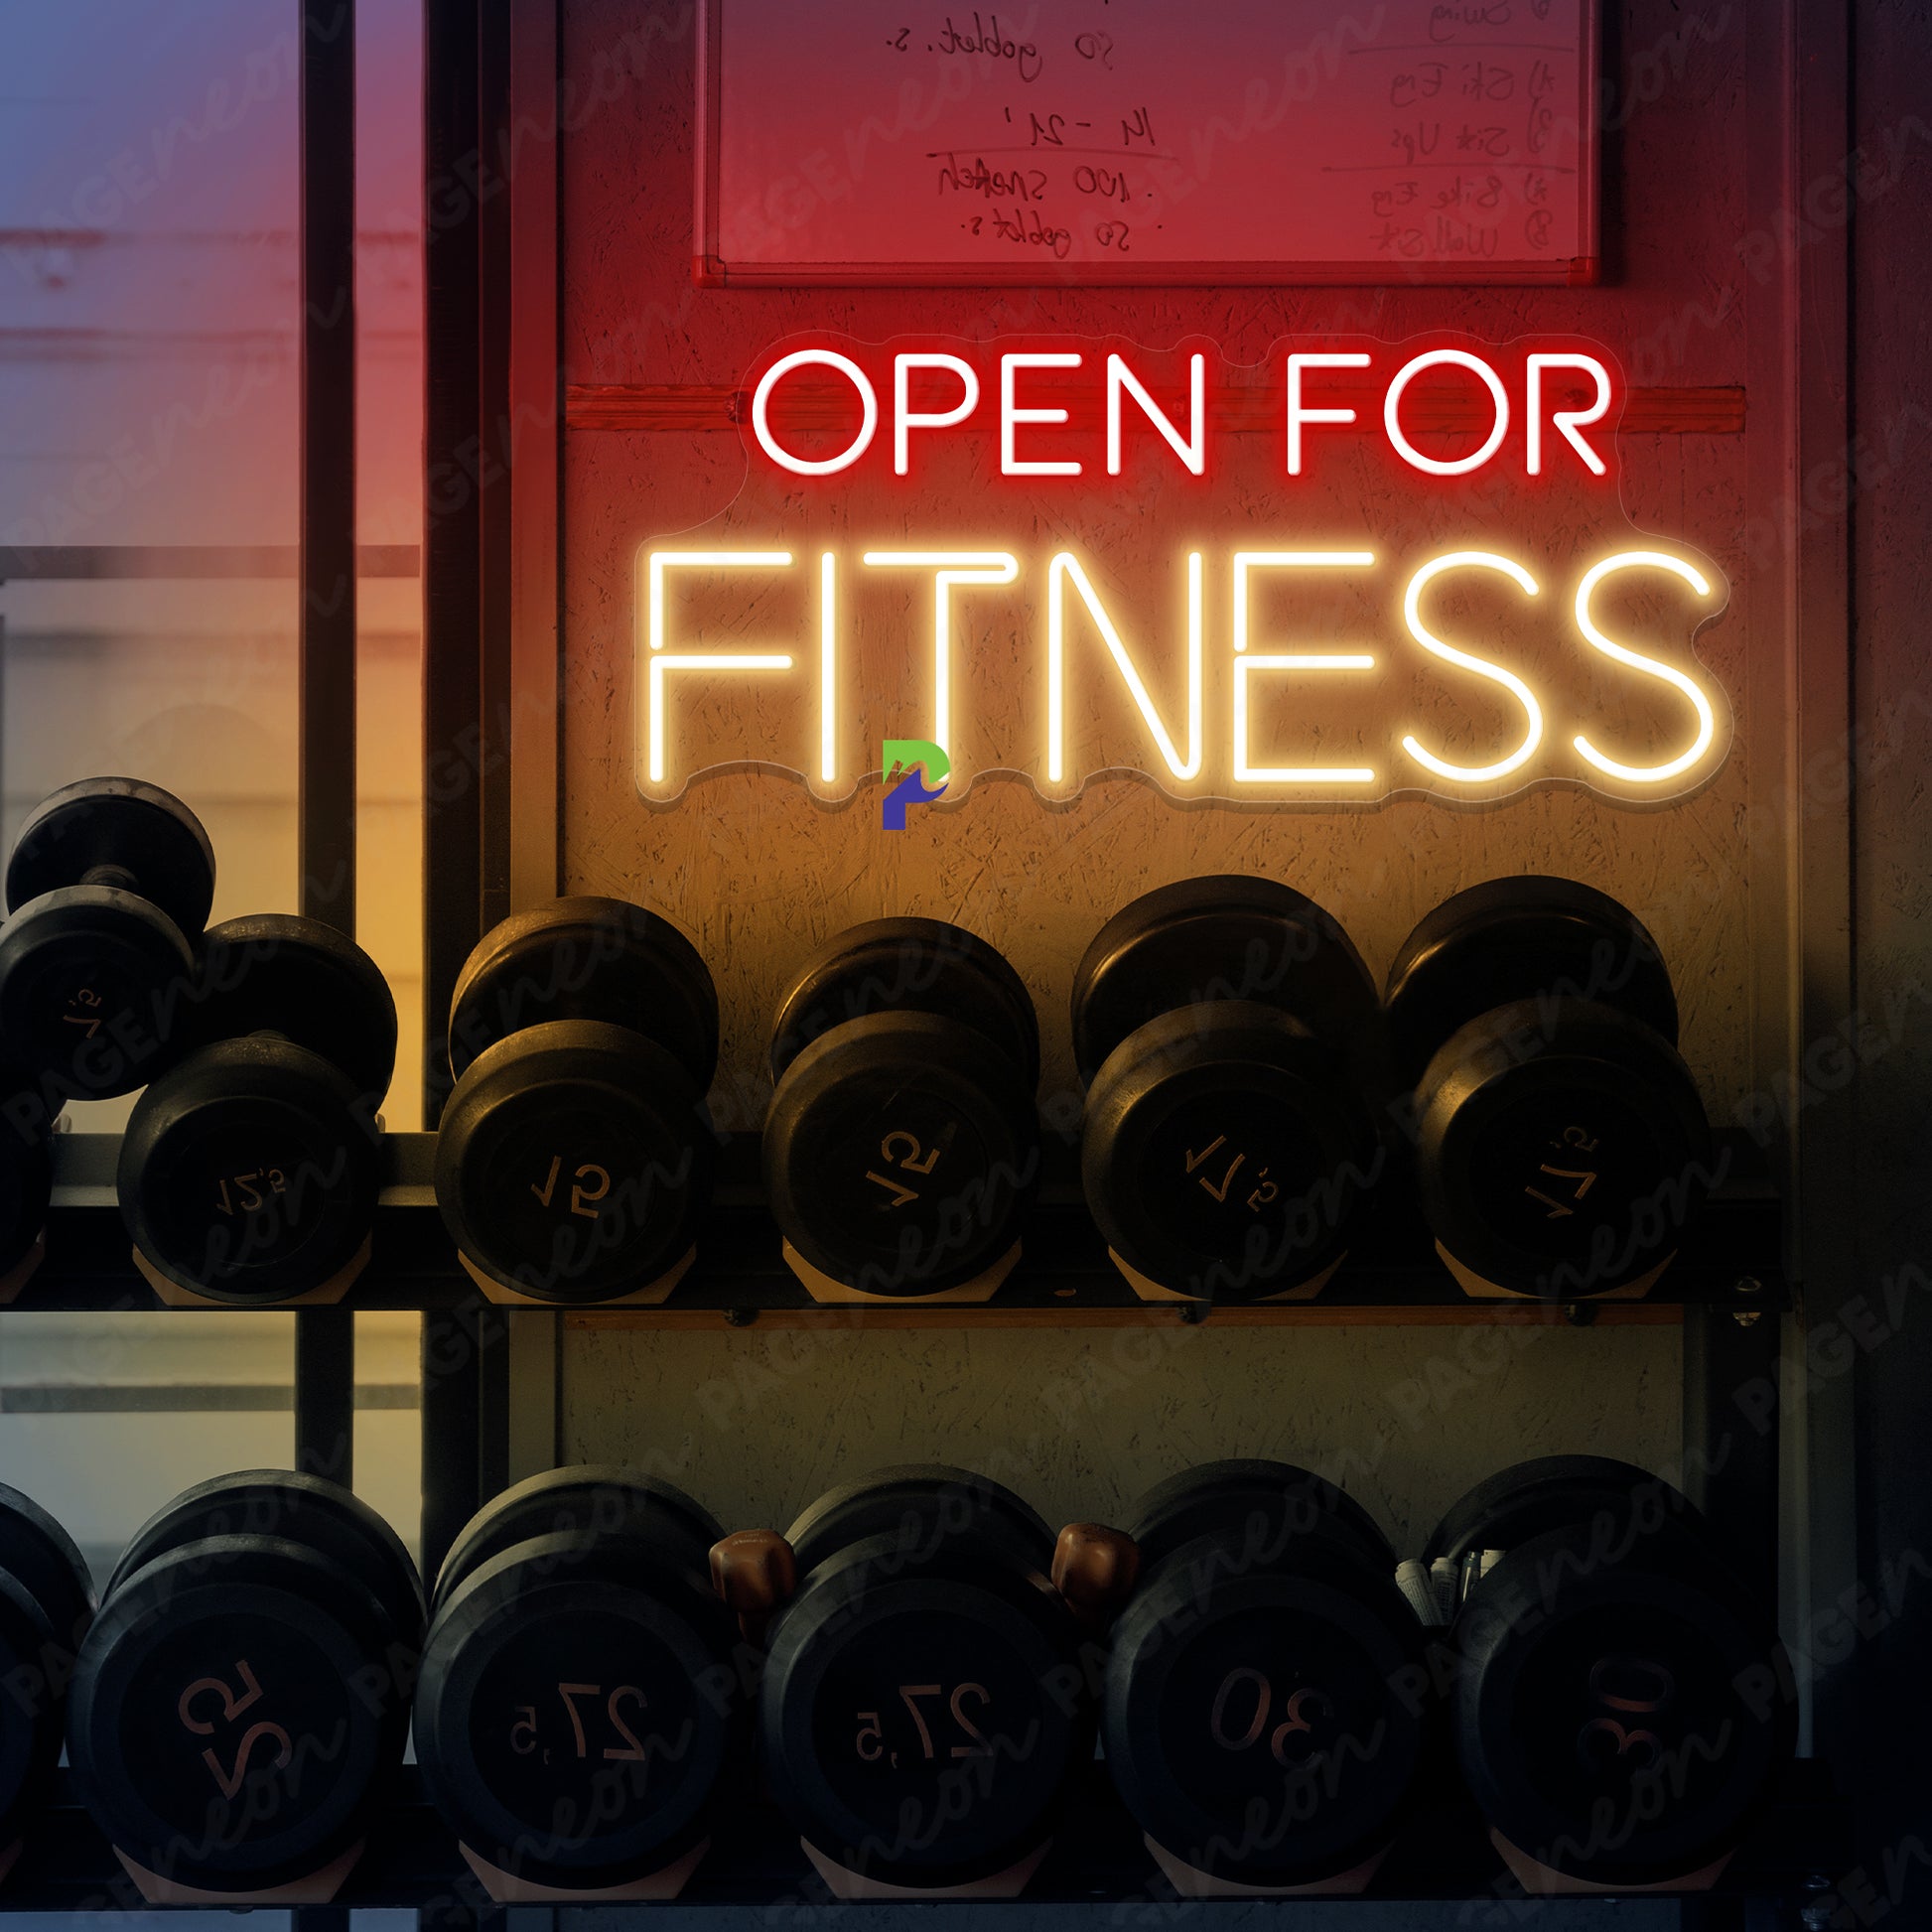 Open For Fitness Neon Sign Buisness Gym Led Light gold yellow